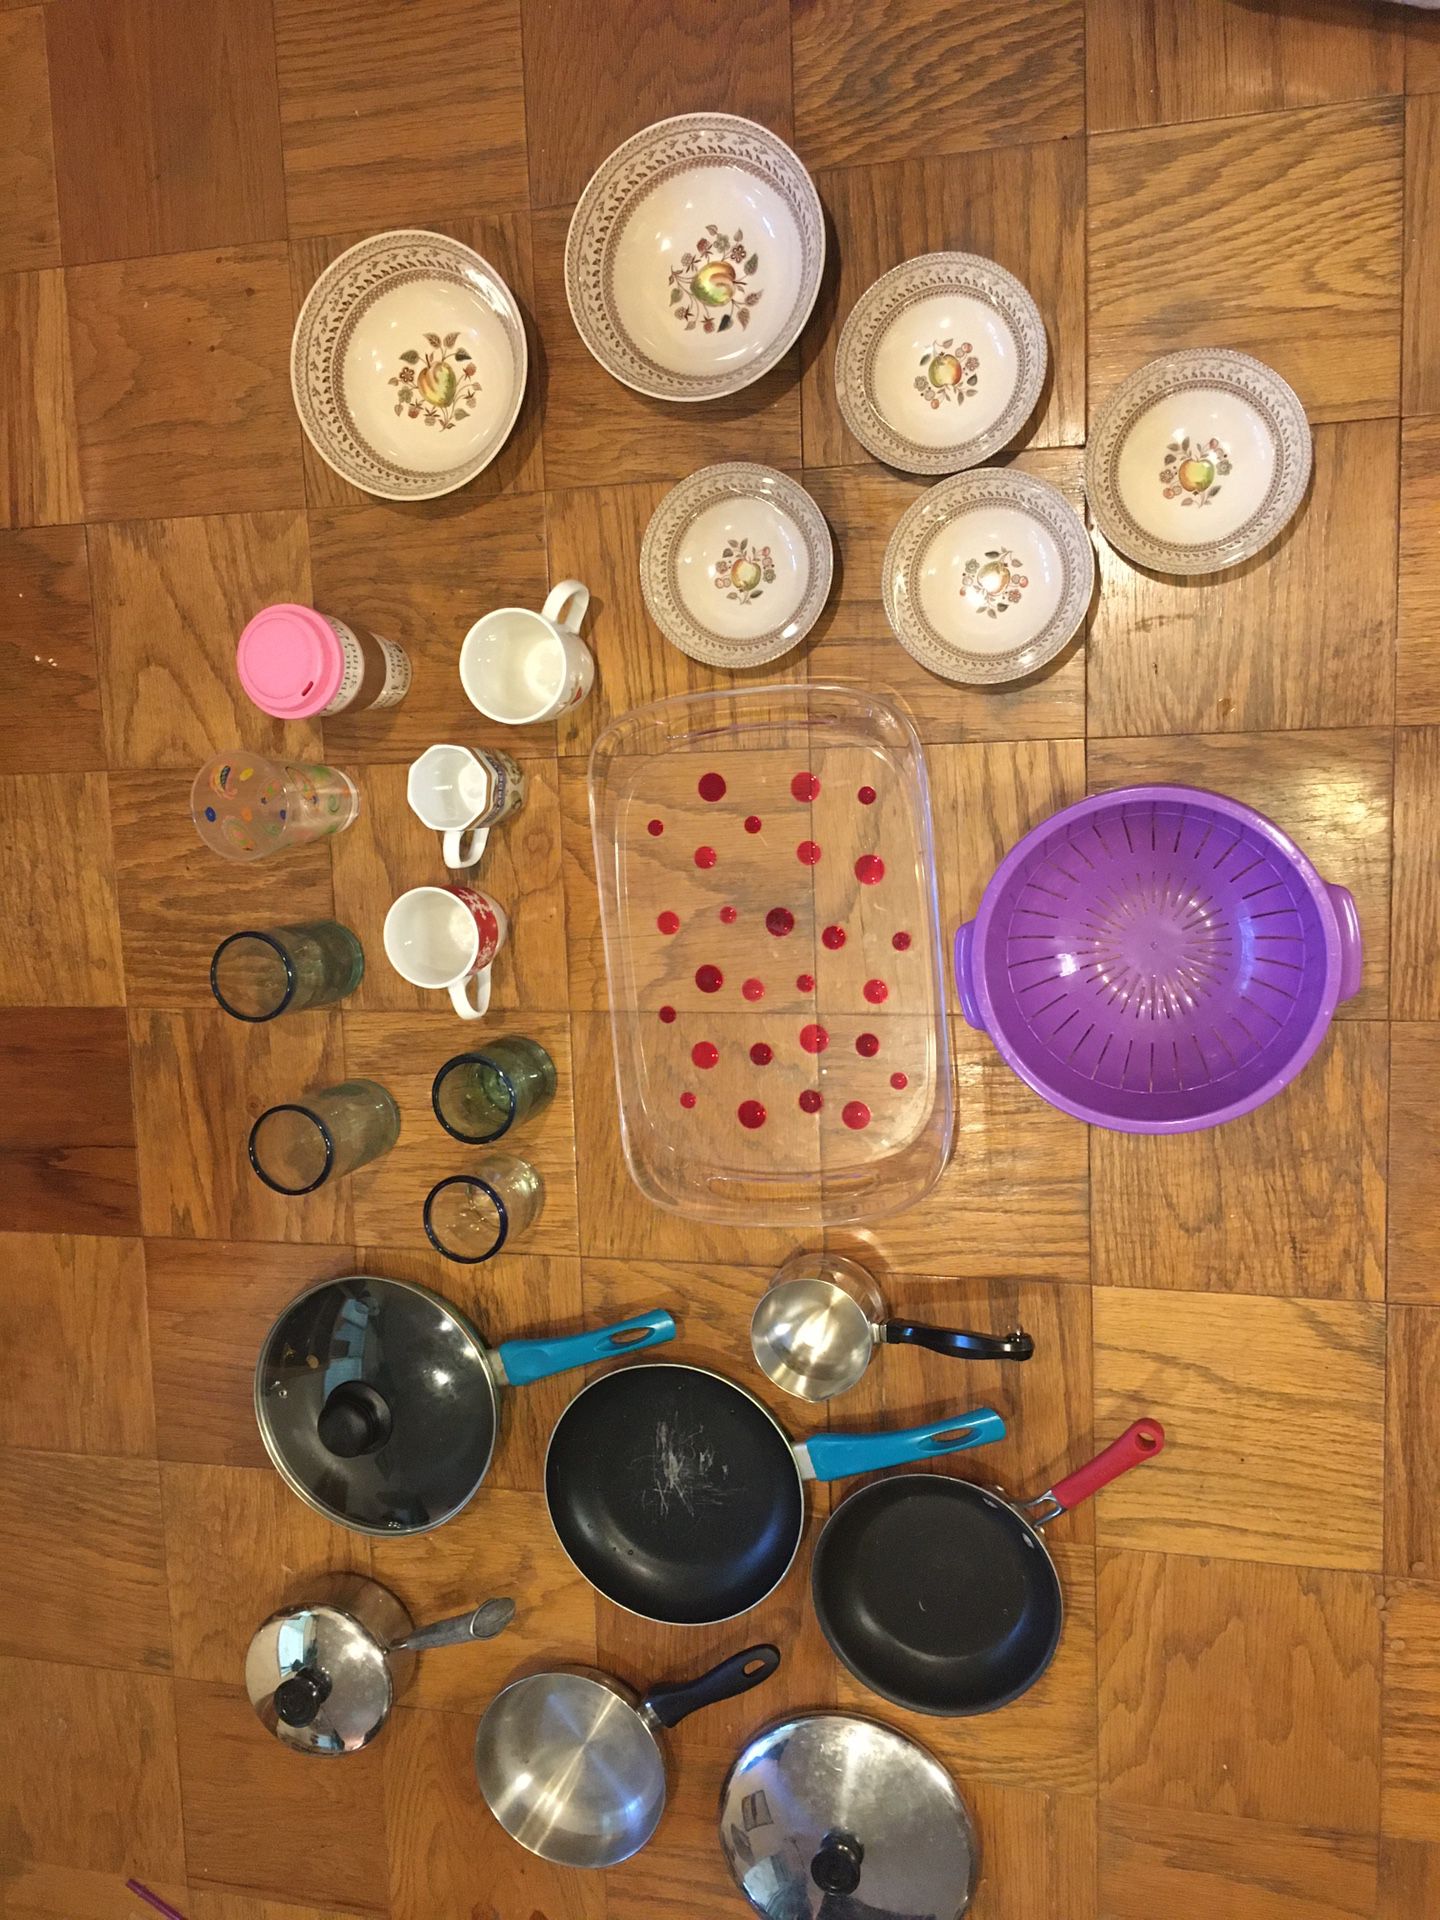 Various kitchen items: pots, pans, glasses, mugs, serving tray, strainer